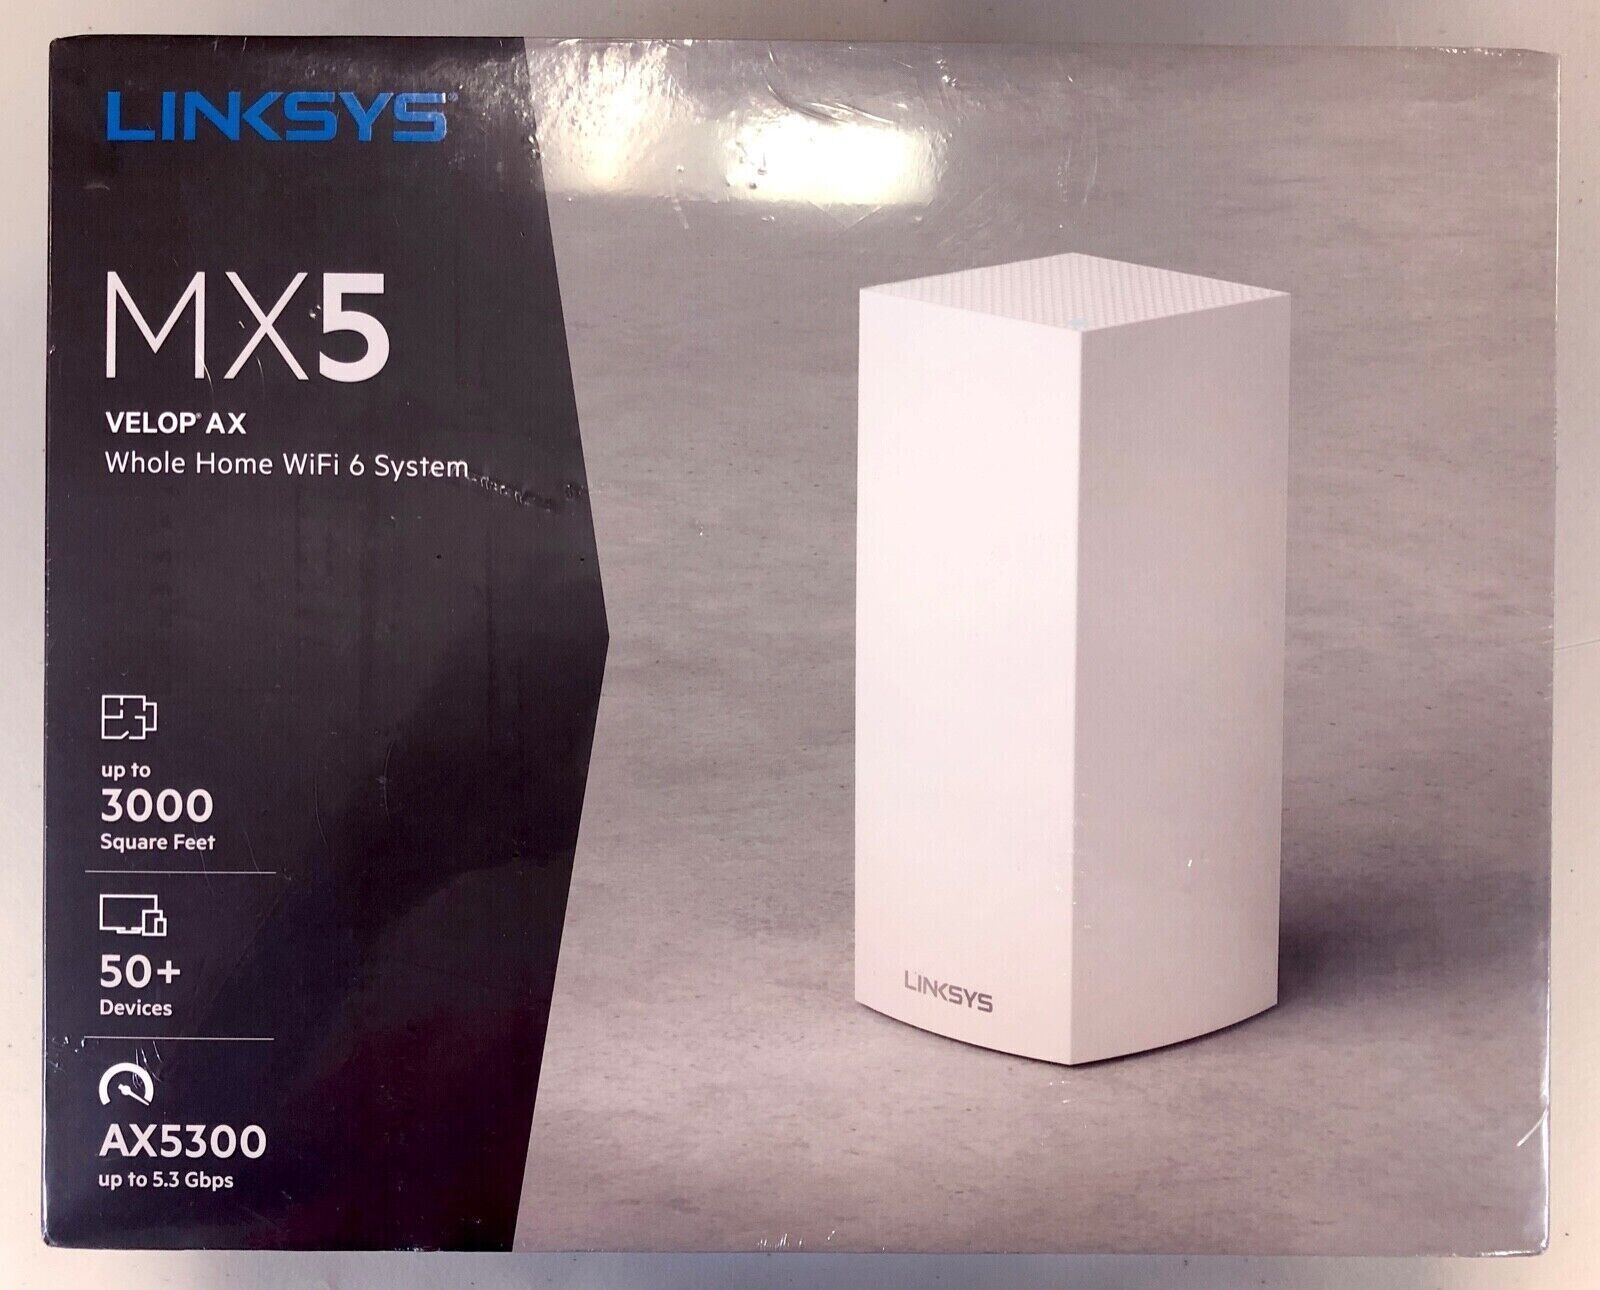 NEW SEALED Linksys MX5 Velop AX Whole Home Wi-Fi 6 System - AX5300 MX5300